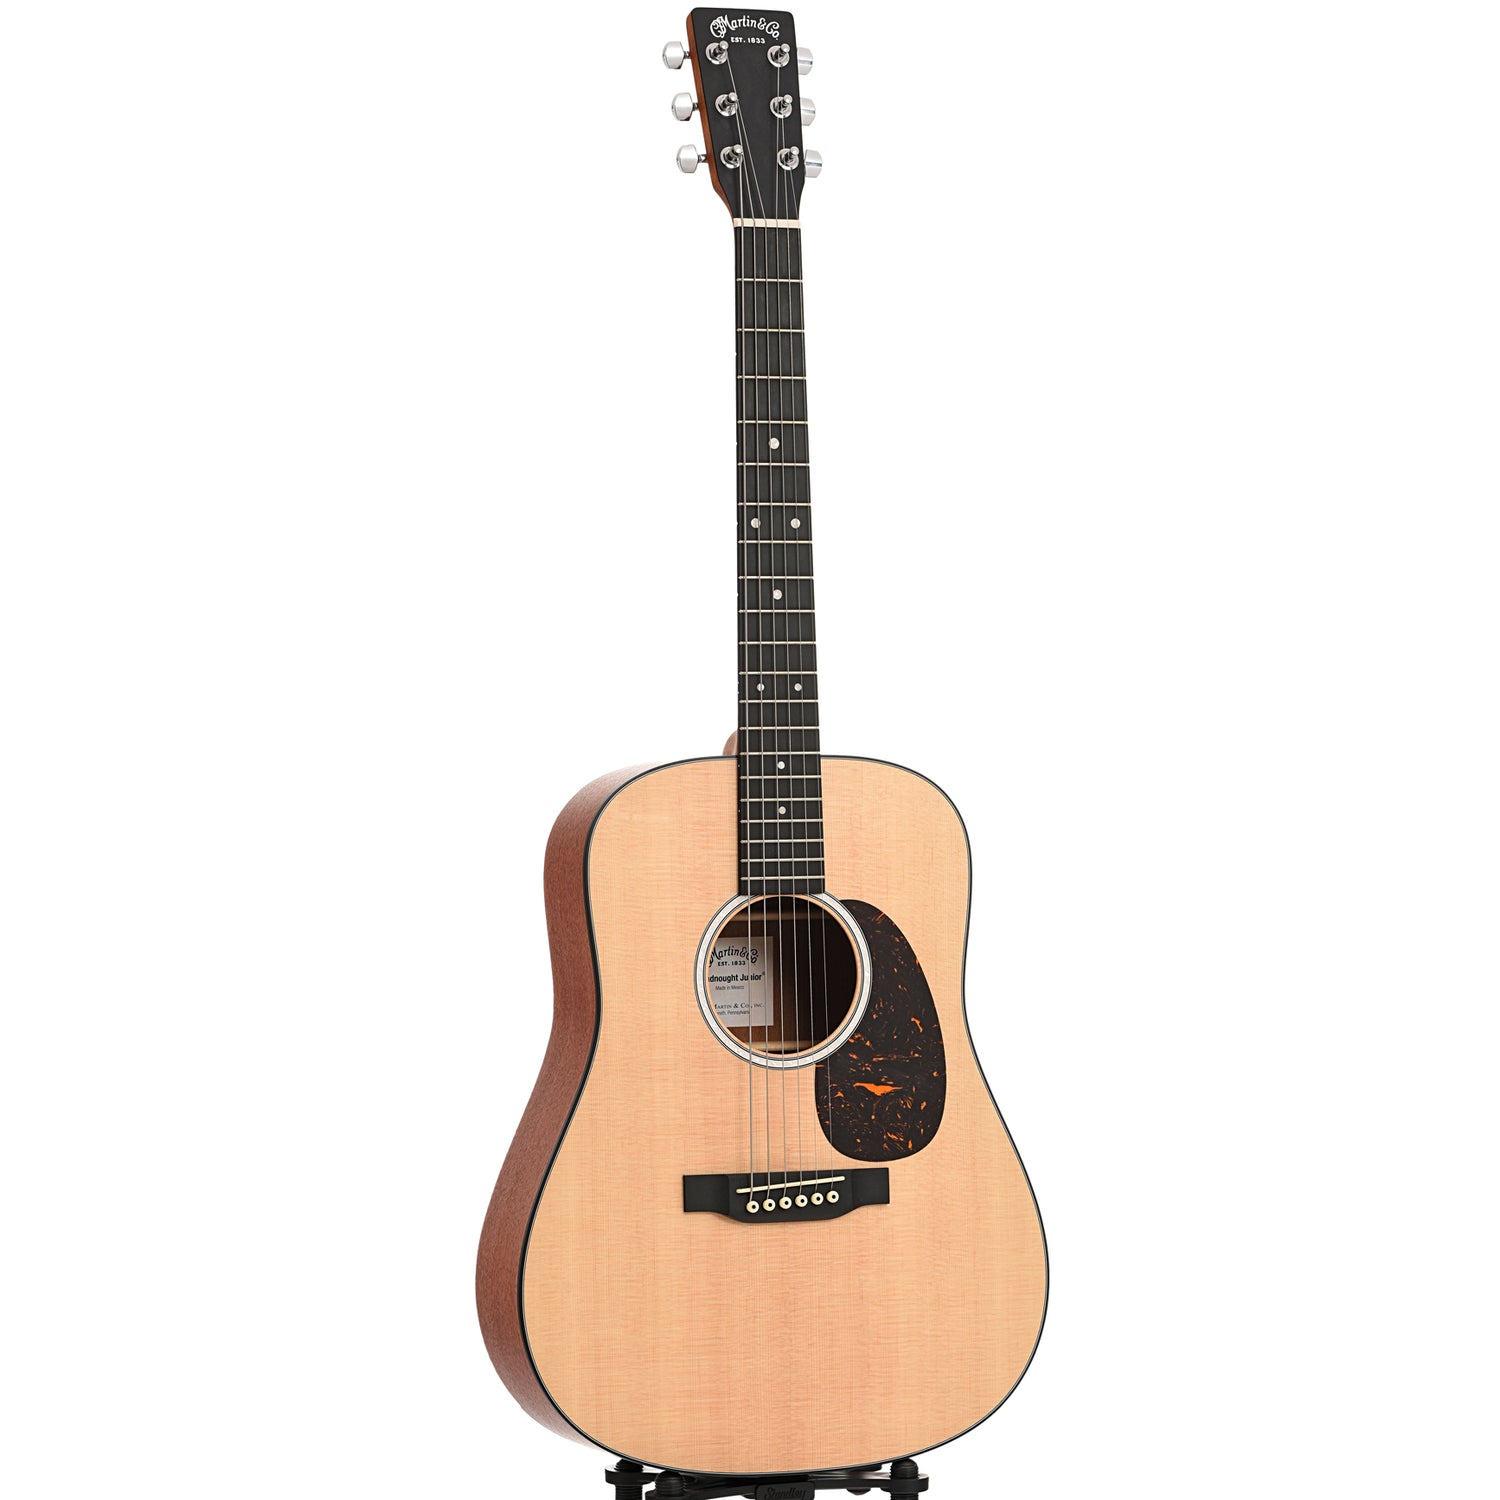 Full front and side of Martin D Jr 10 Acoustic